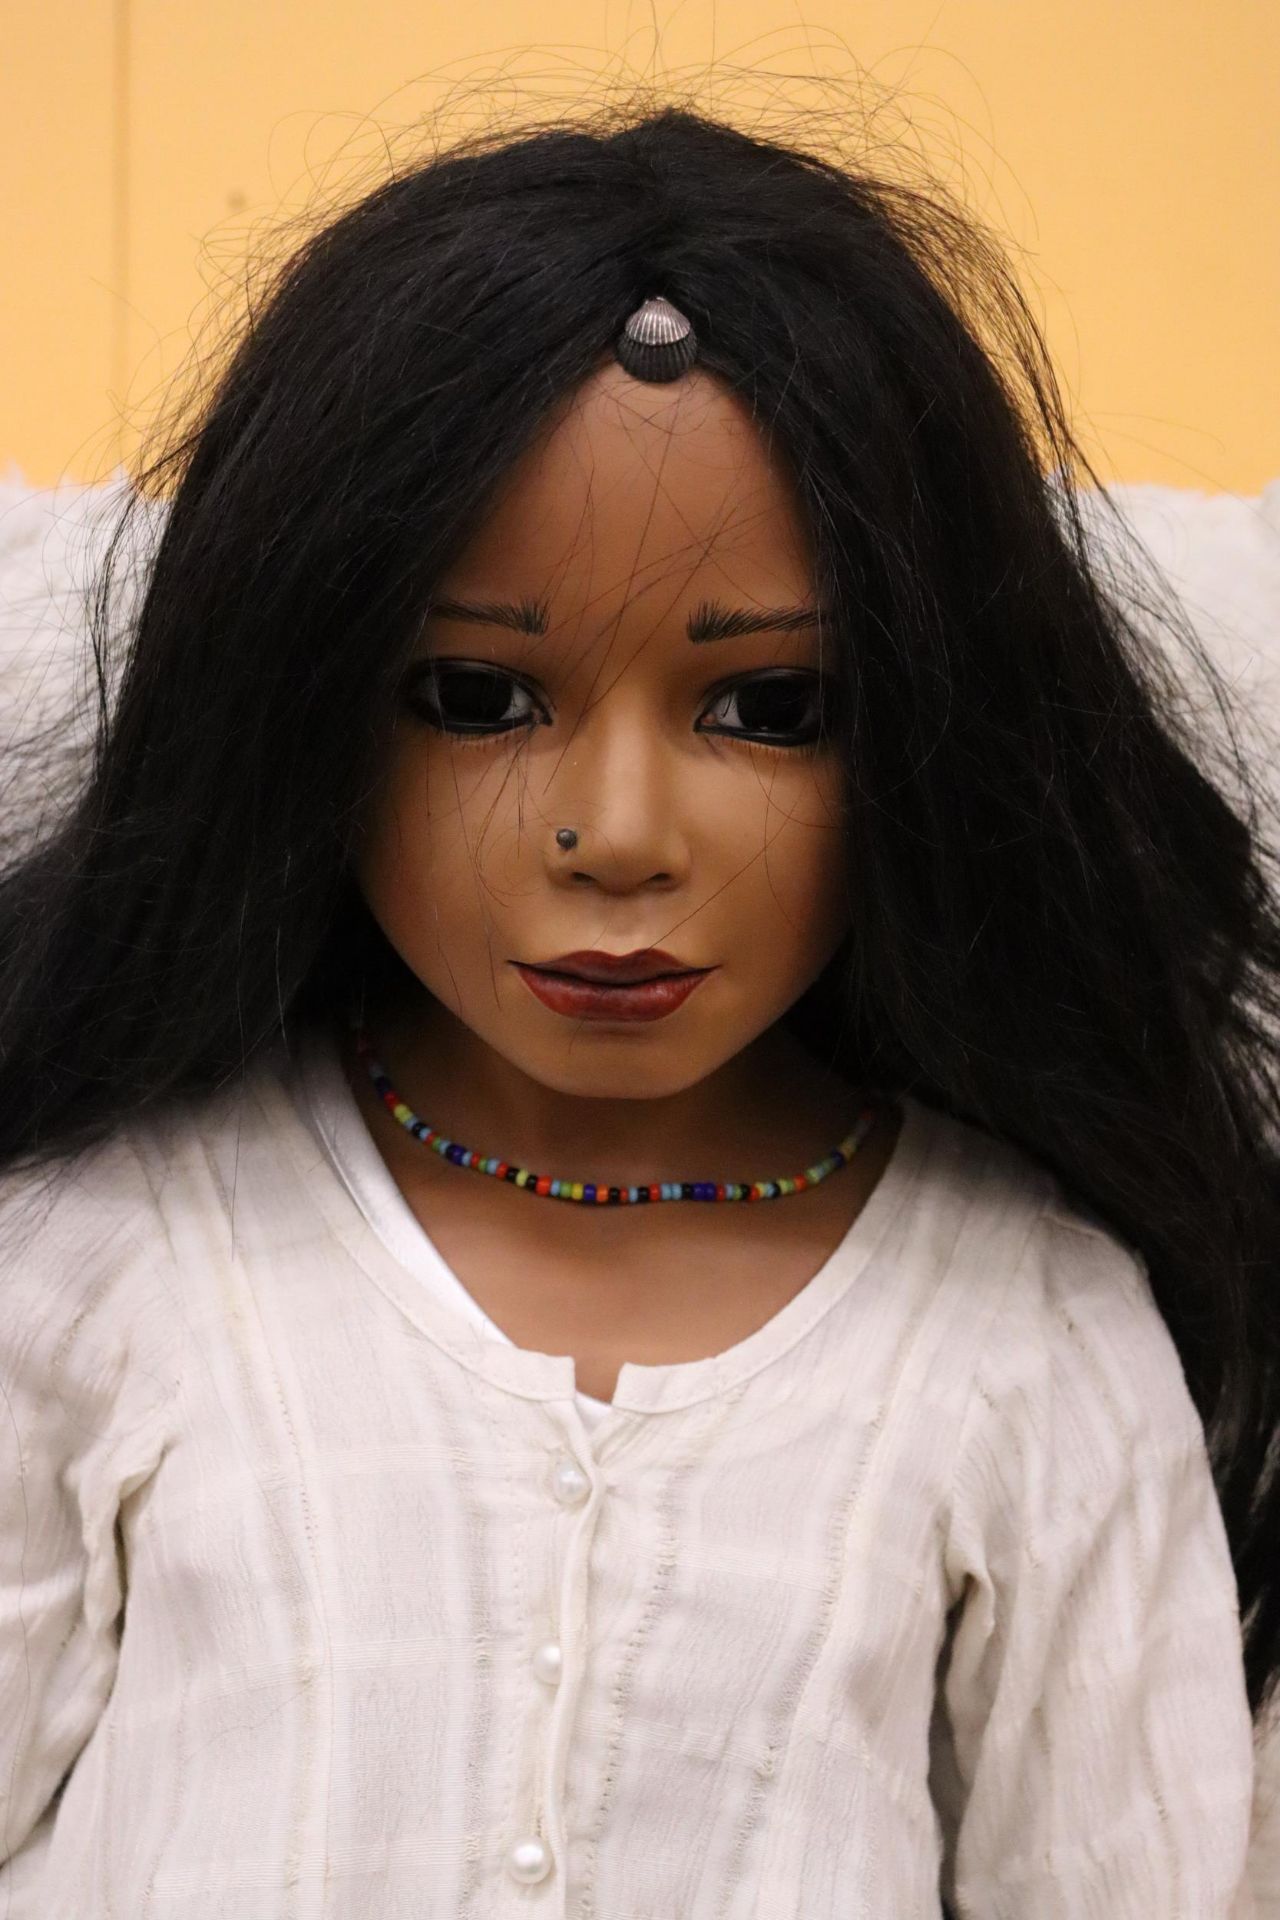 AN INDIAN GOTZ DOLL MINDIYANA PRODUCED IN 1996 BY DOLL ARTIST PHILLIP HEATH - F77/1996 - Image 2 of 8